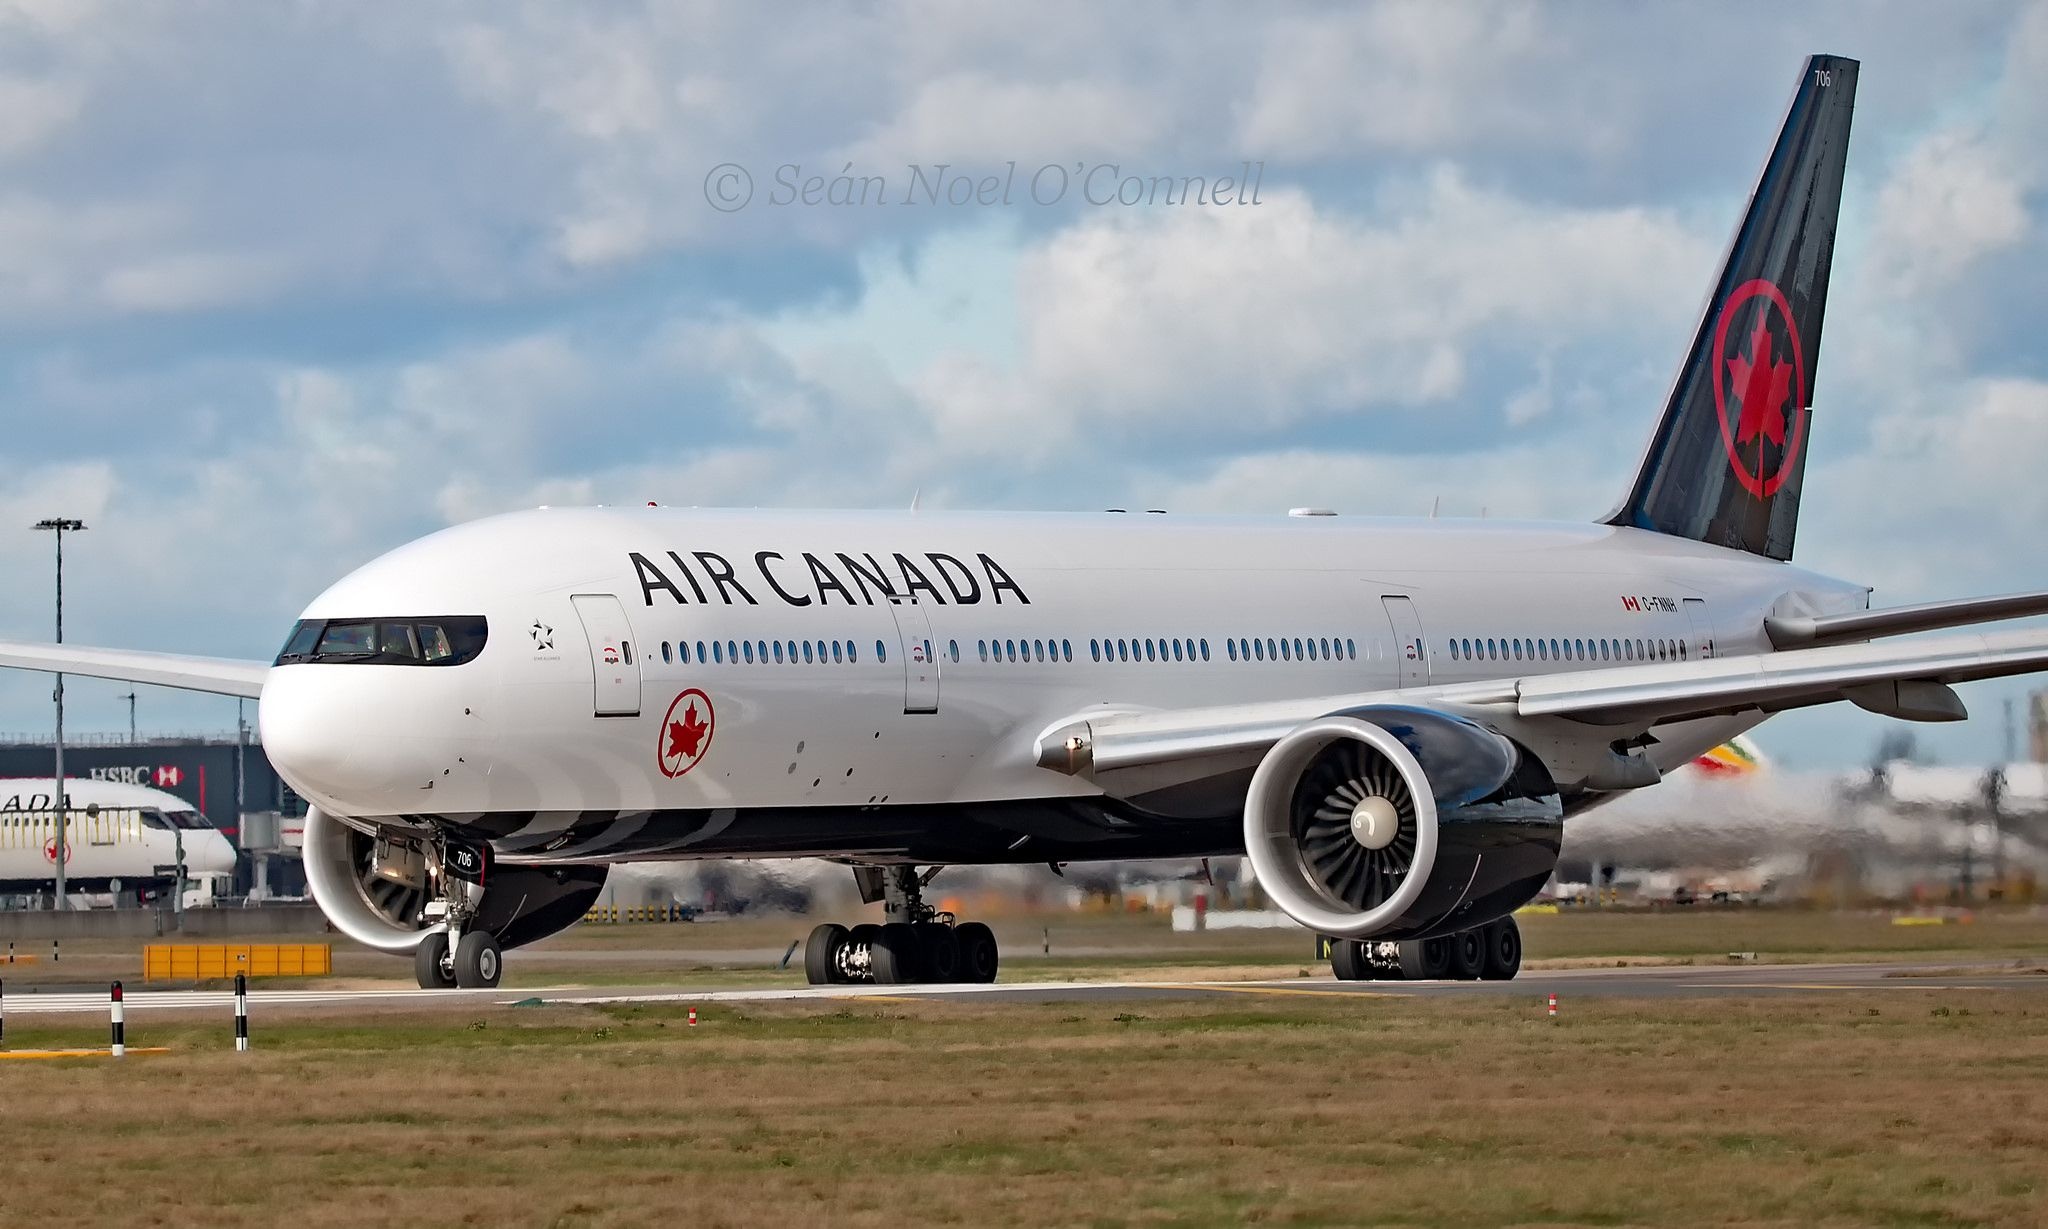 Air Canada Boeing 777, C-FNNH, LHR Canadian Airlines, 2050x1230 HD Desktop